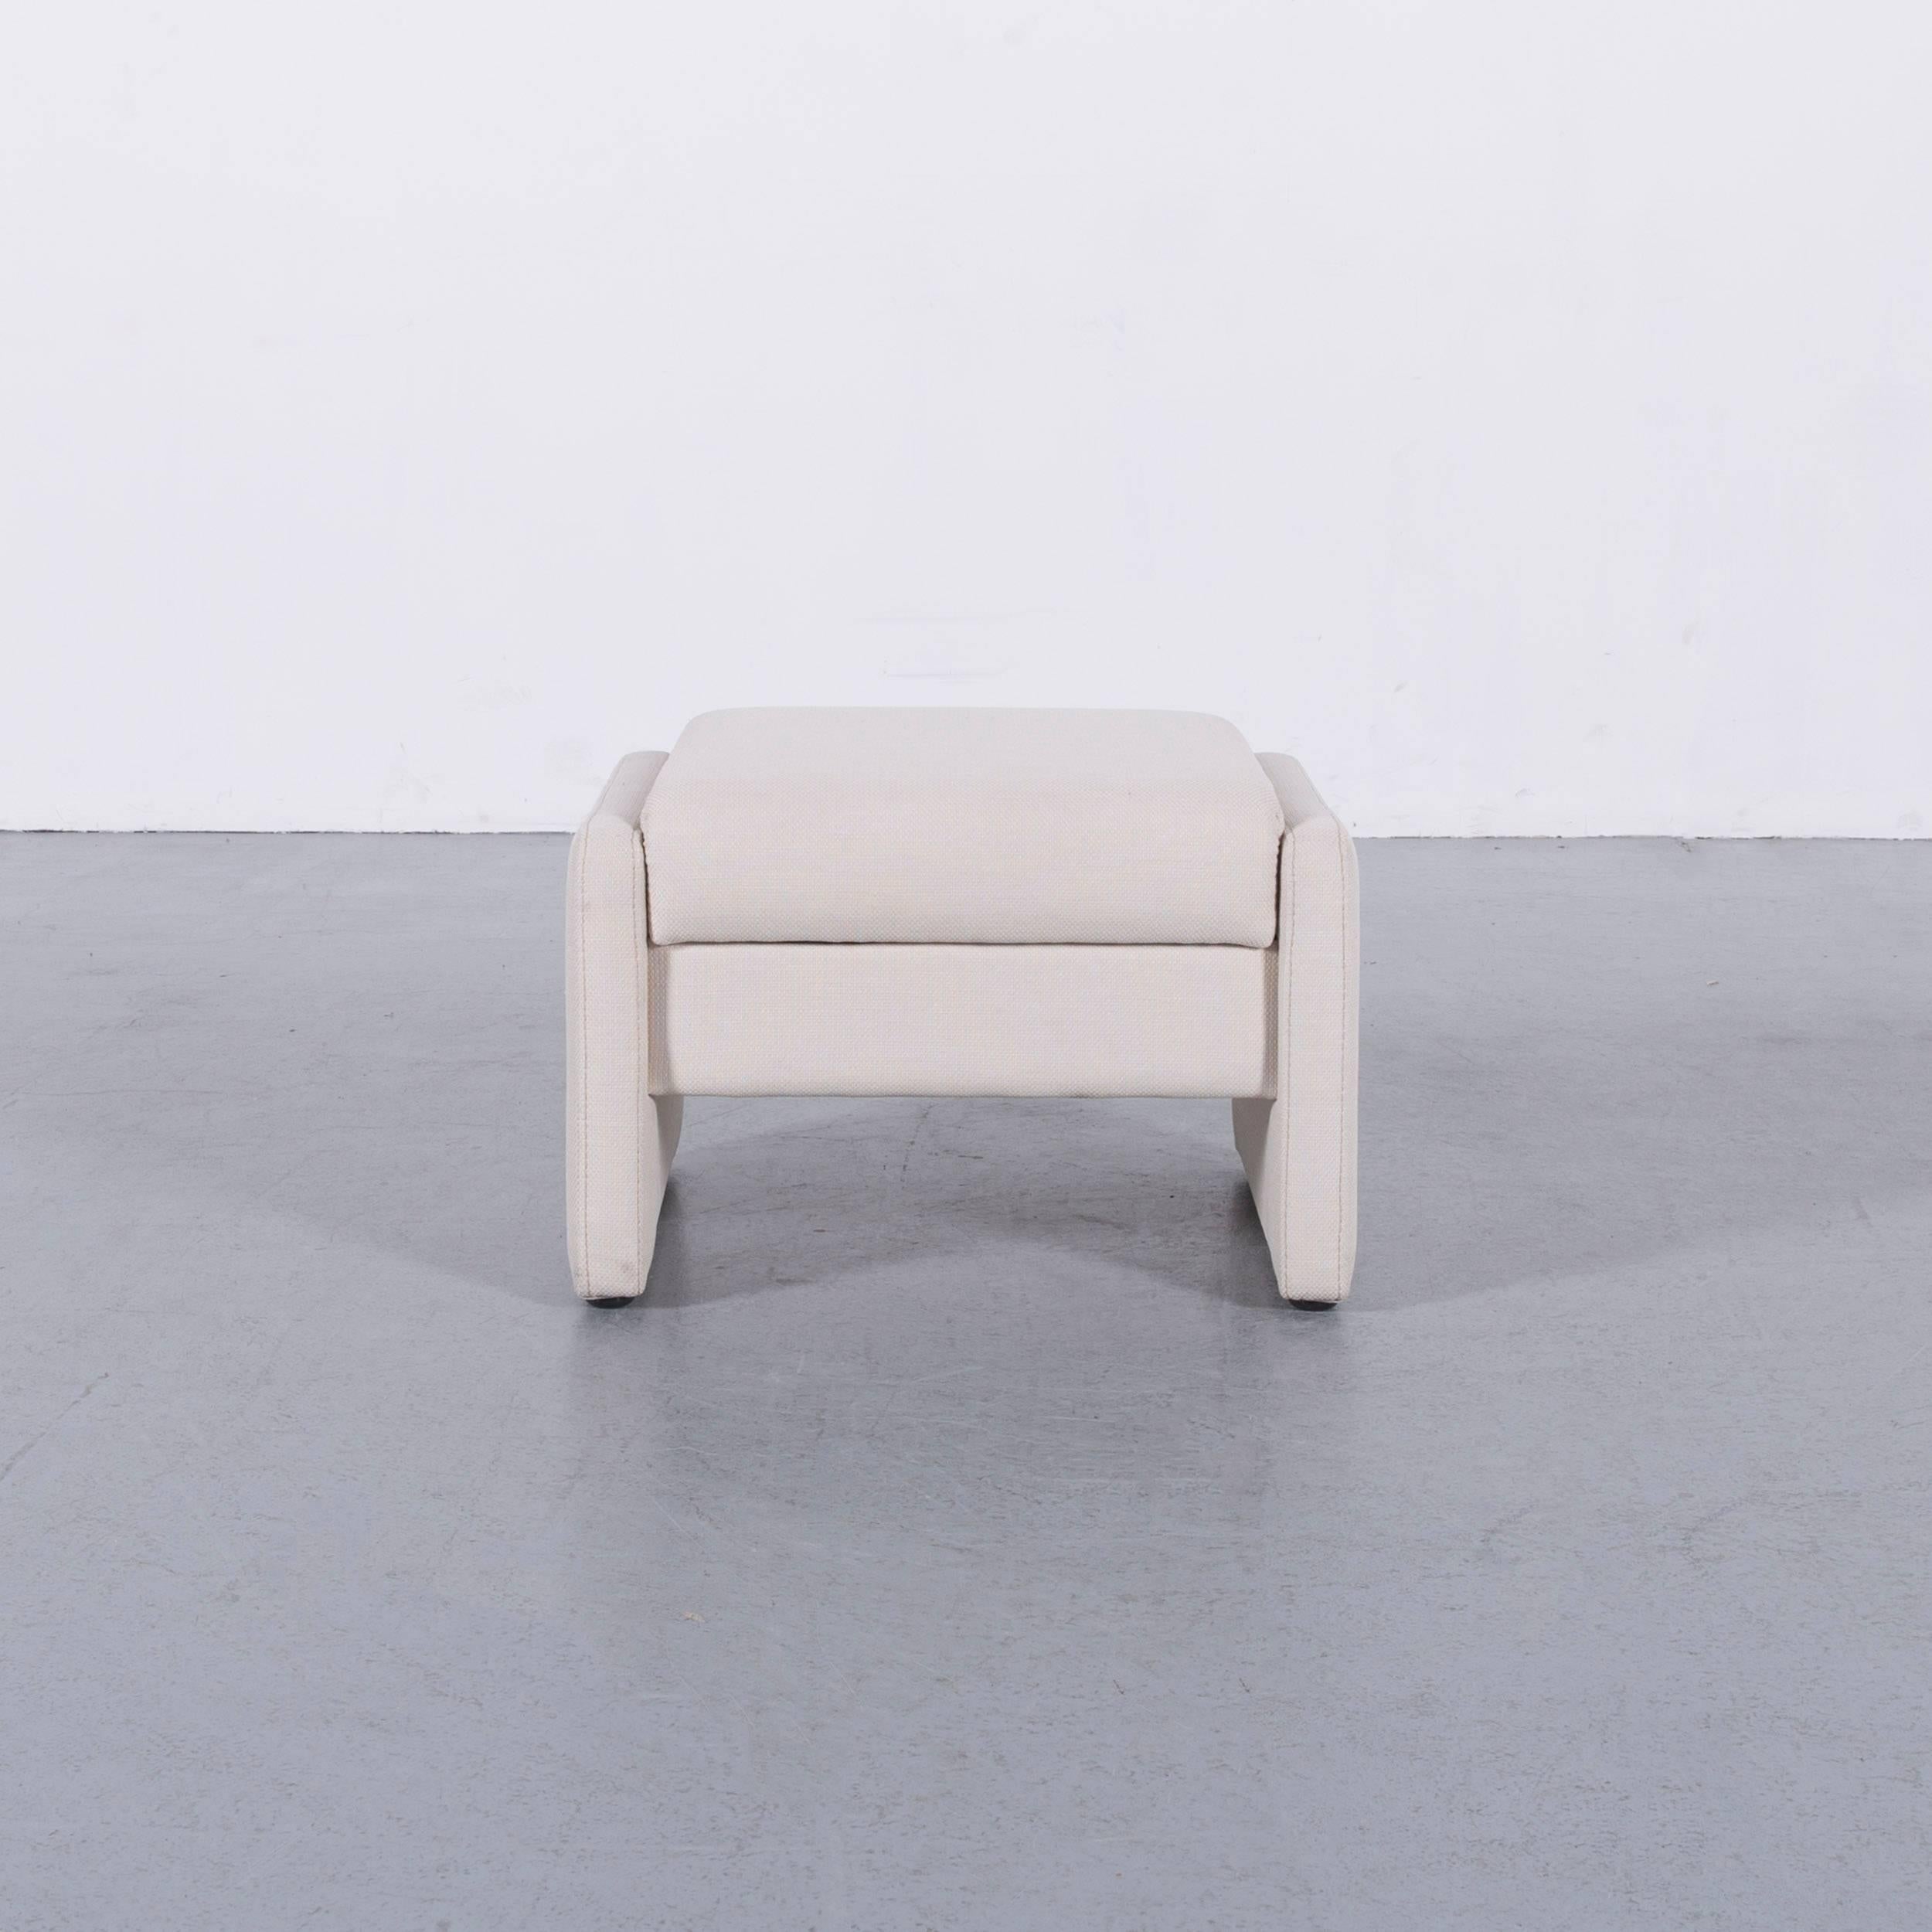 We bring to you an Himolla fabric foot-stool off-white bench.